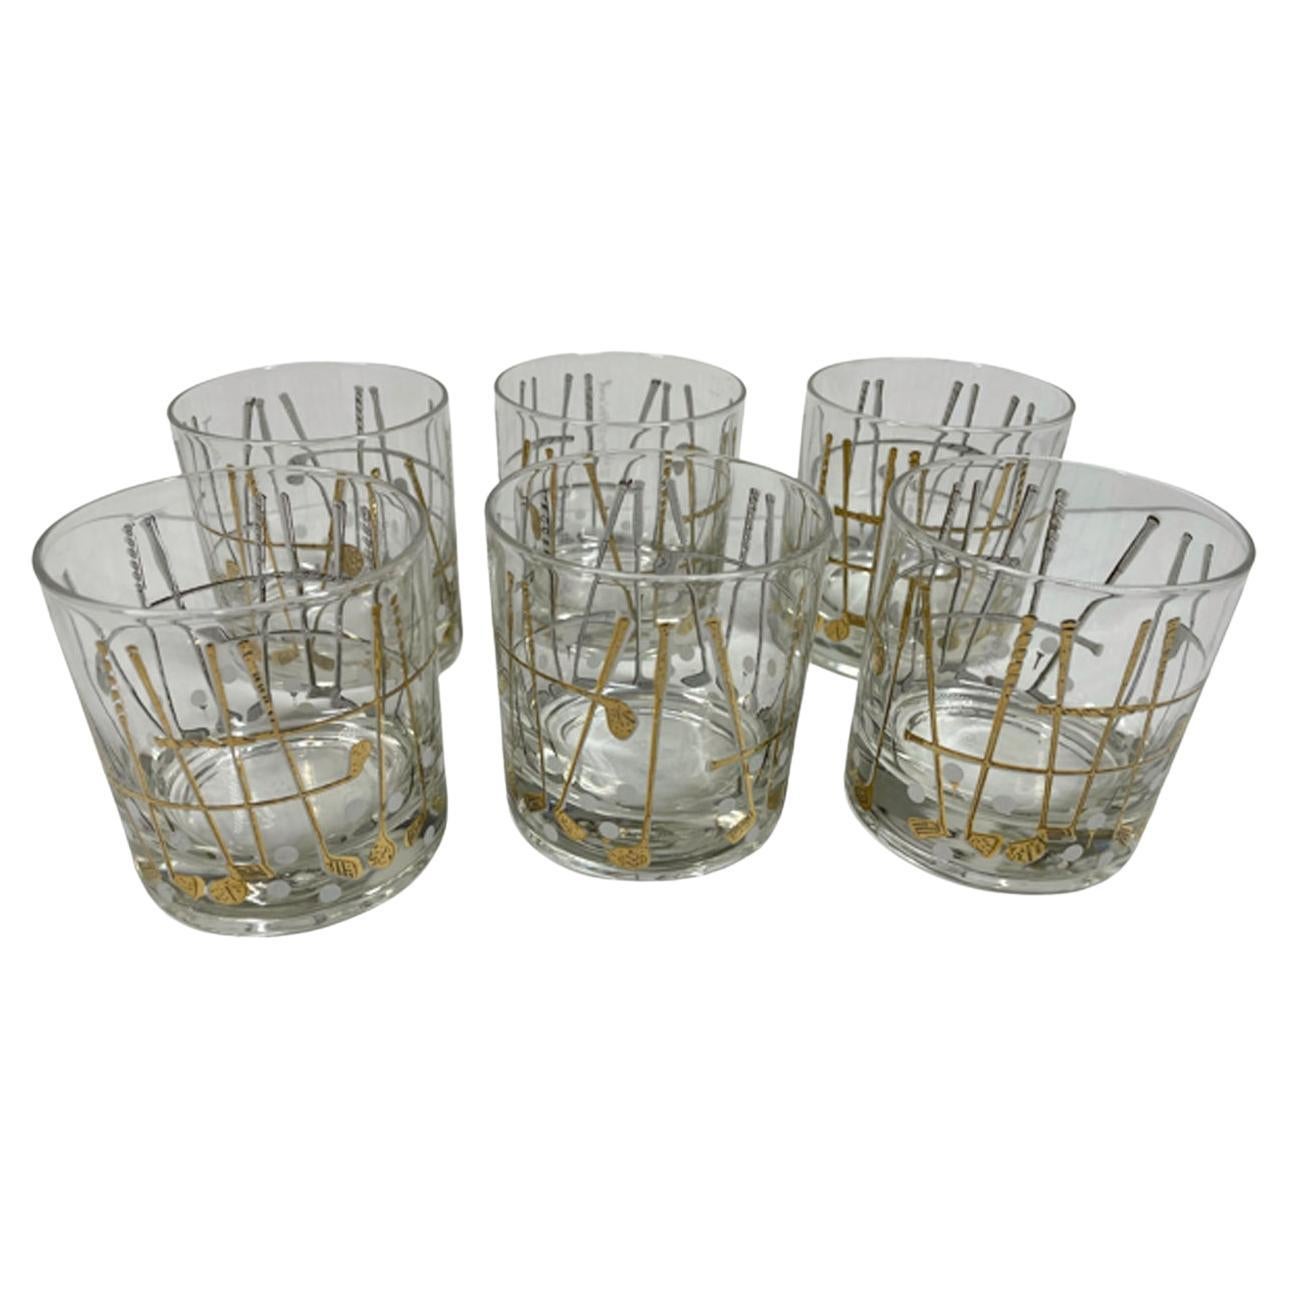 Six Georges Briard Designed Rocks Glasses in the "Golf" Pattern 